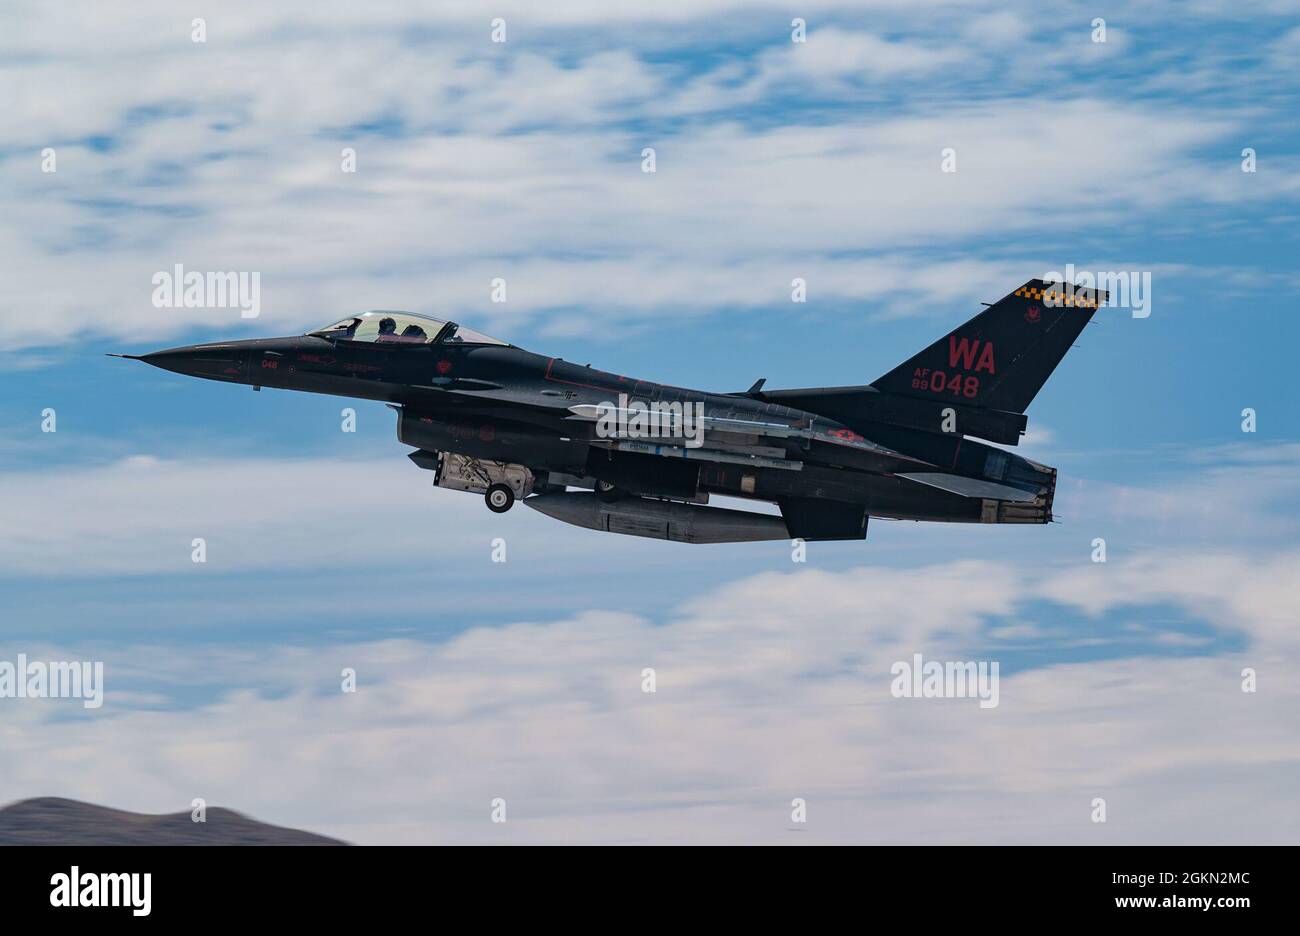 An F-16C Falcon fighter jet (Wraith) assigned to the 64th Aggressor Squadron (AGRS), takes off  during a U.S. Air Force Weapons School Integration exercise at Nellis AFB, Nevada, June 2, 2021. Aggressor pilots are highly skilled in adversarial tactics and provide realism to U.S. and allied forces during training exercises. Stock Photo